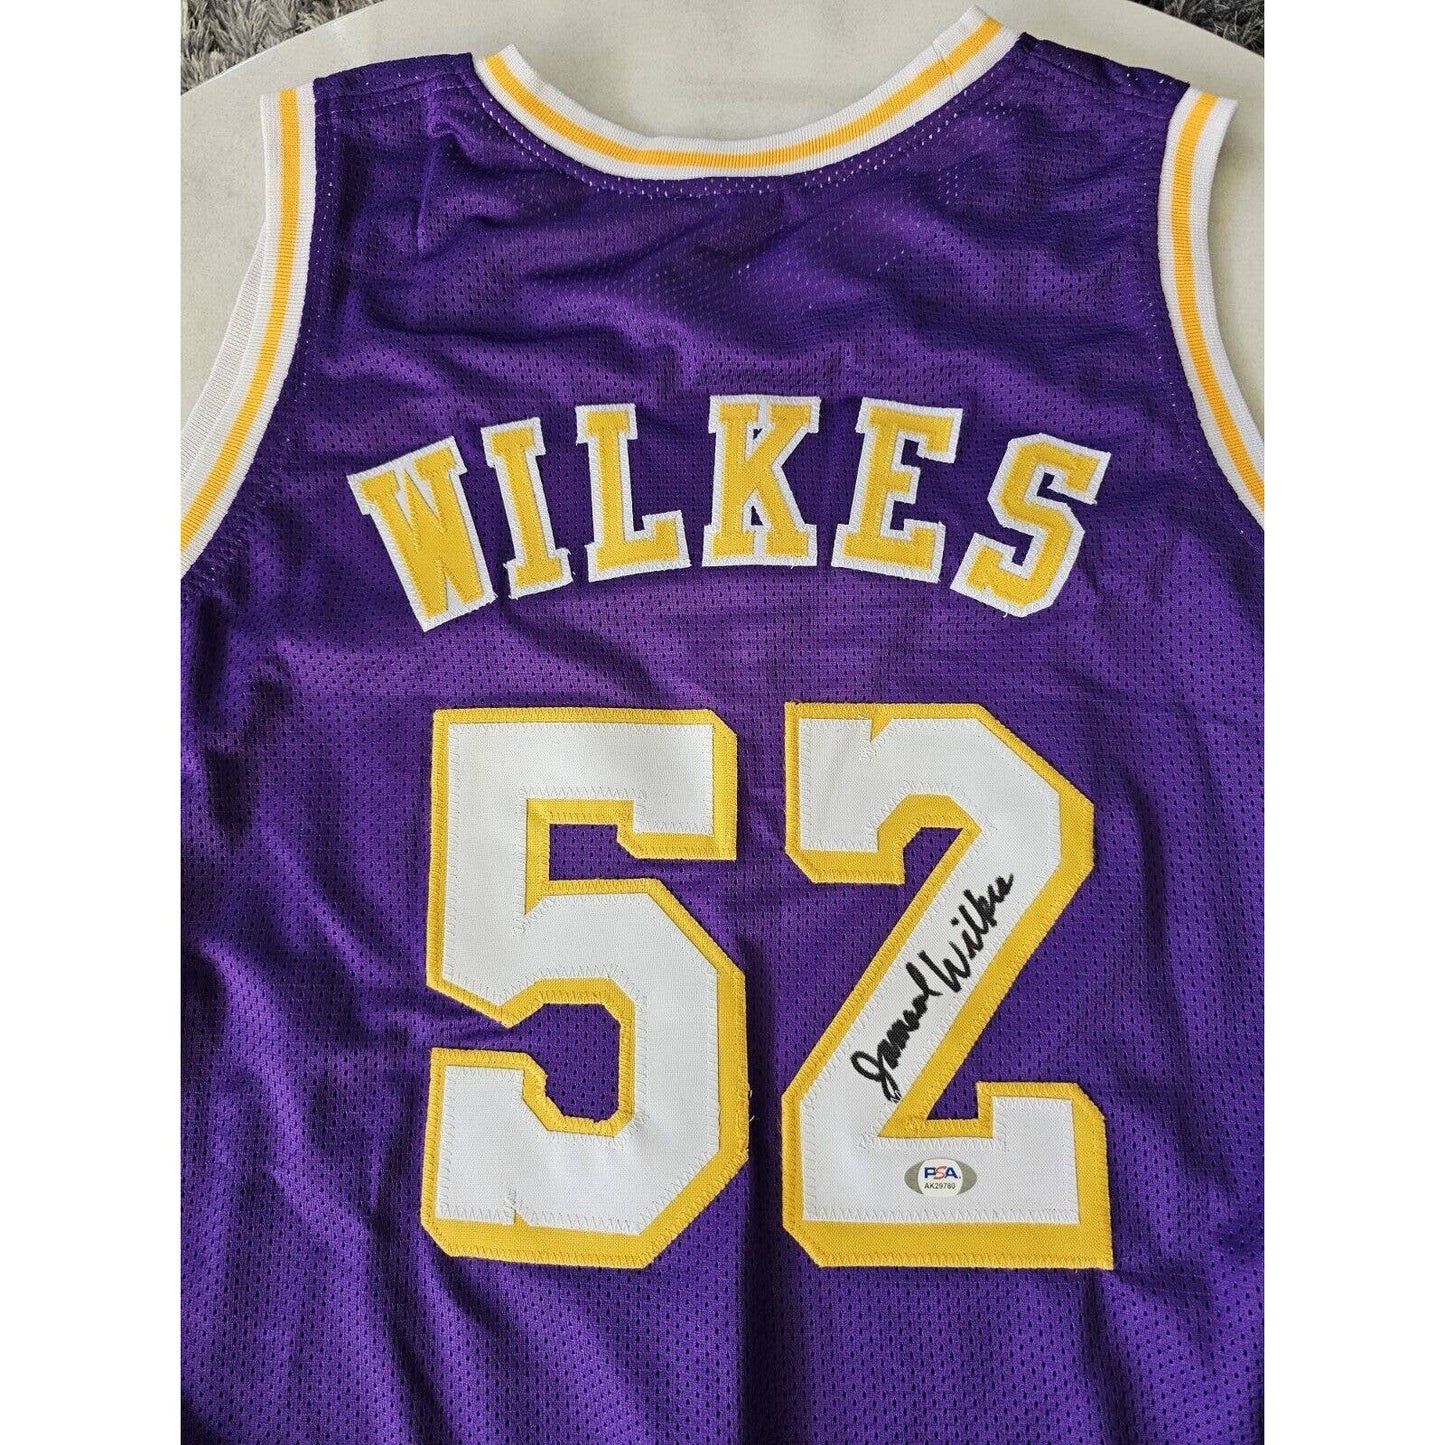 Jamaal Wilkes Autographed/Signed Jersey PSA/DNA Sticker Los Angeles Lakers LA